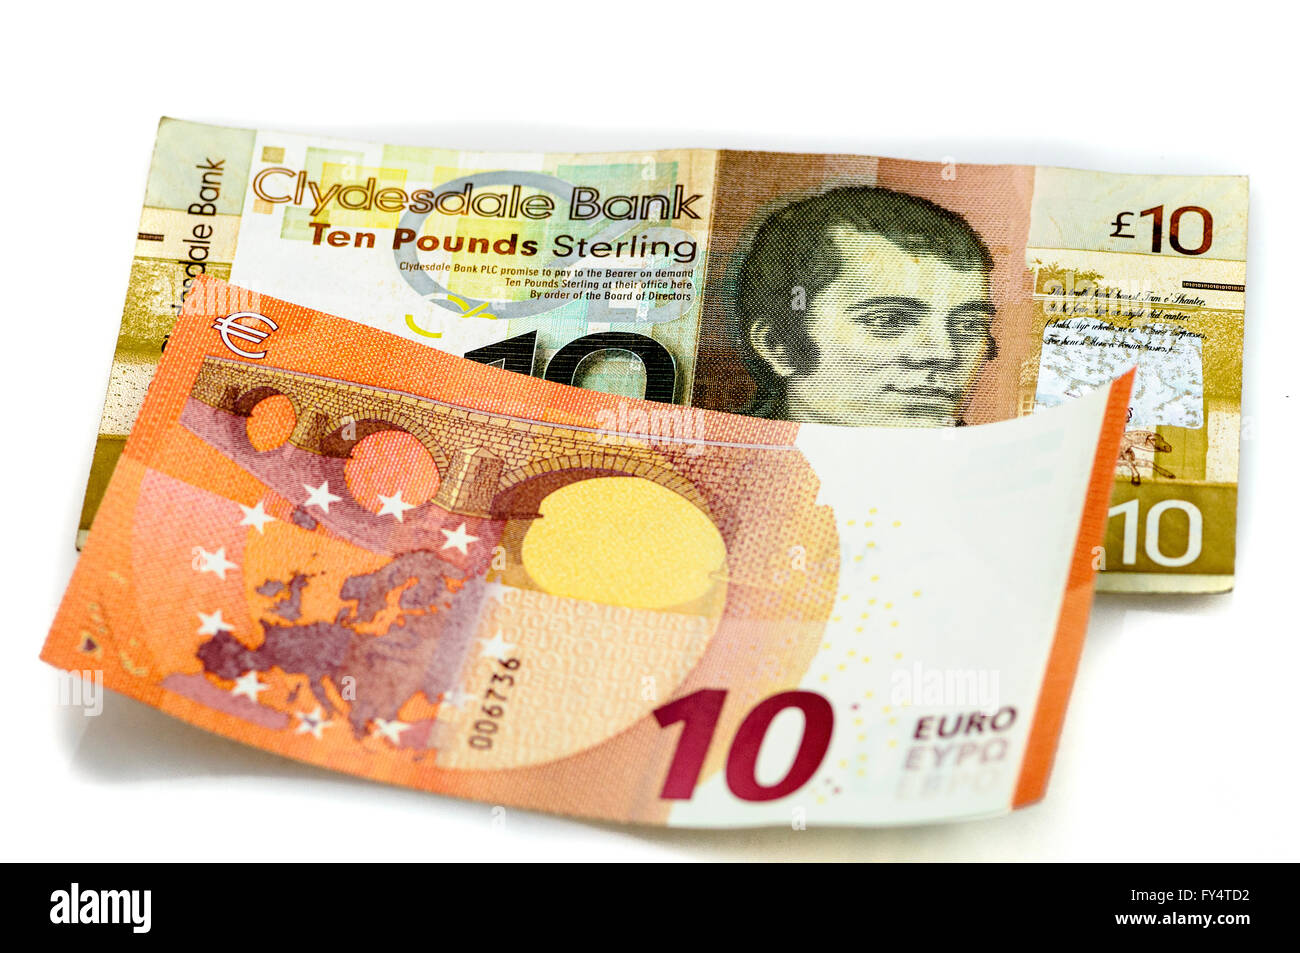 Clydesdale Bank £10 note from Scotland with  €10 Euro. Stock Photo